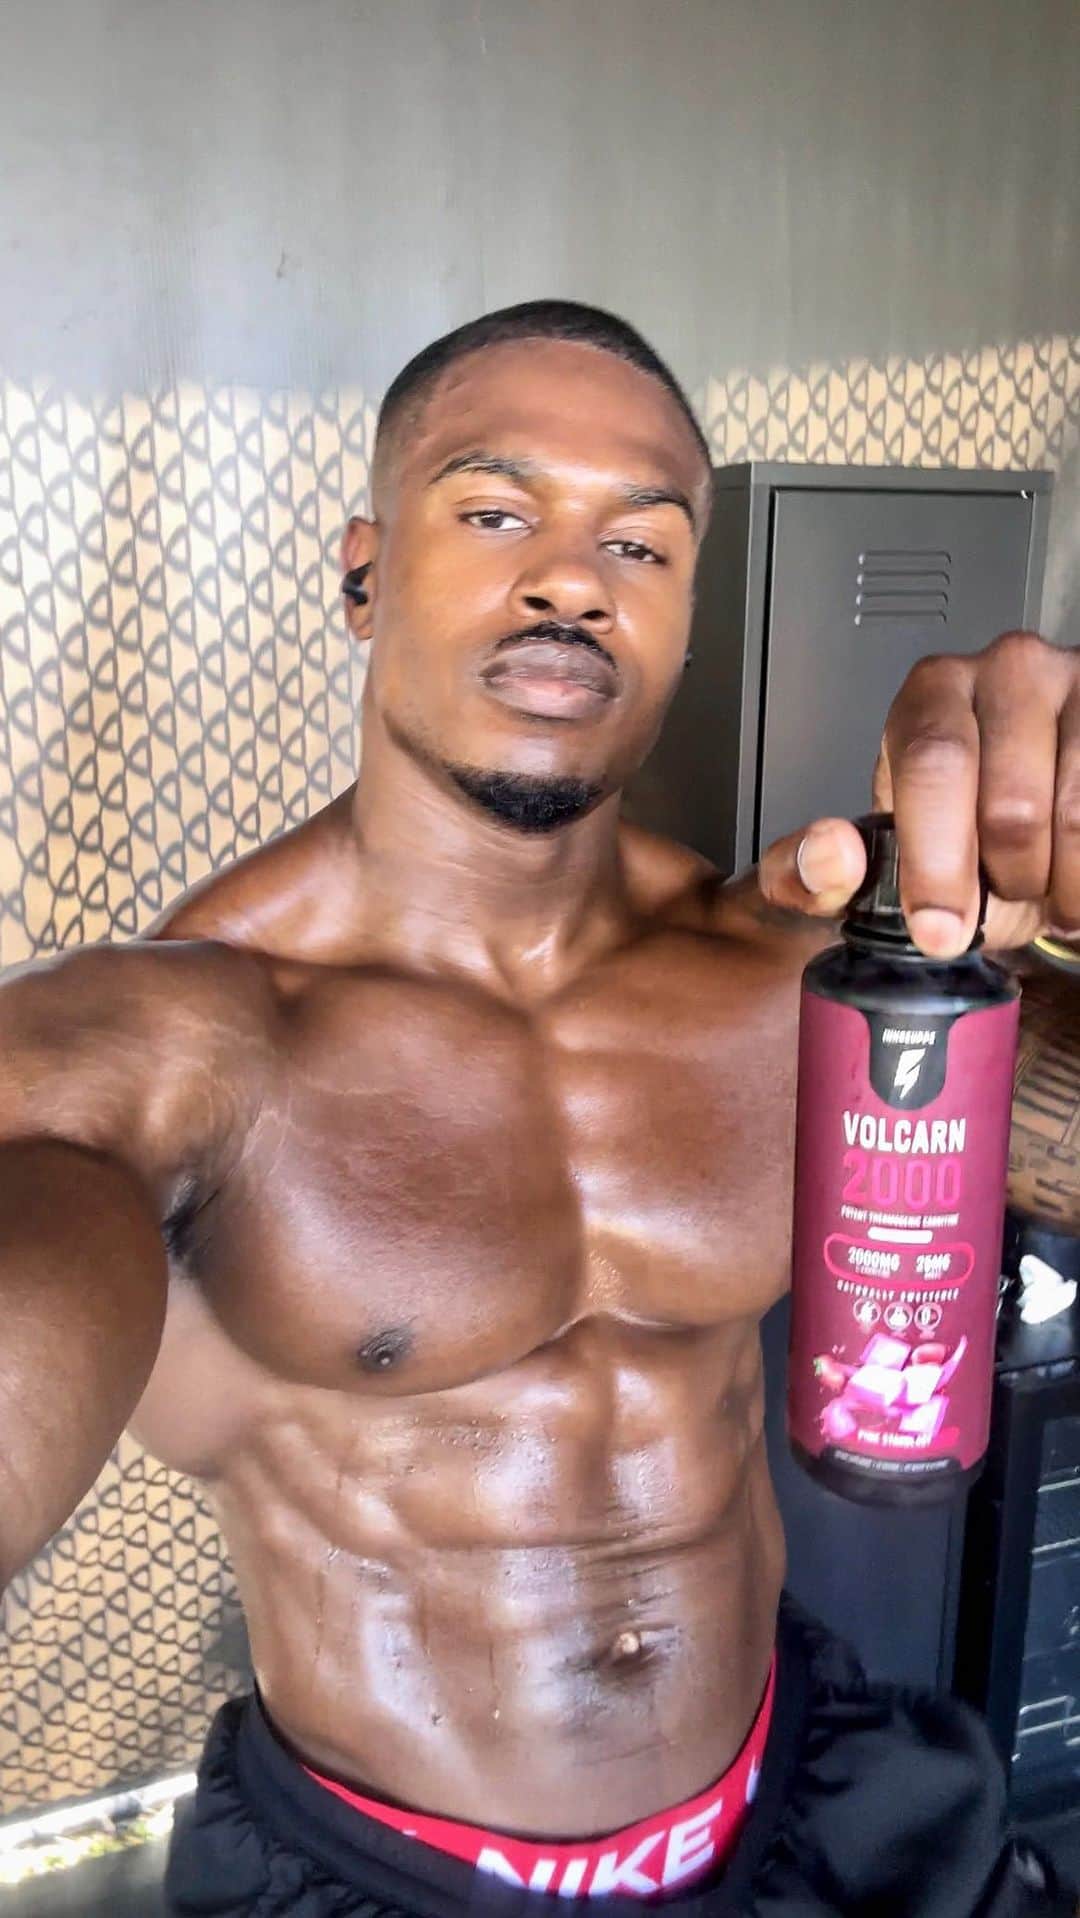 Simeon Pandaのインスタグラム：「Cardio & training in general hits different with @innosupps Volcarn 2000 🔥💦🙌🏾  Volcarn continues to be an asset in my training, when you take your workouts seriously, it’s important to have the right fuel to get you in the zone.  With Volcarn you can really feel the effects within 15 minutes of taking it, it’s the real deal!   Grab a bottle at Innosupps.com」